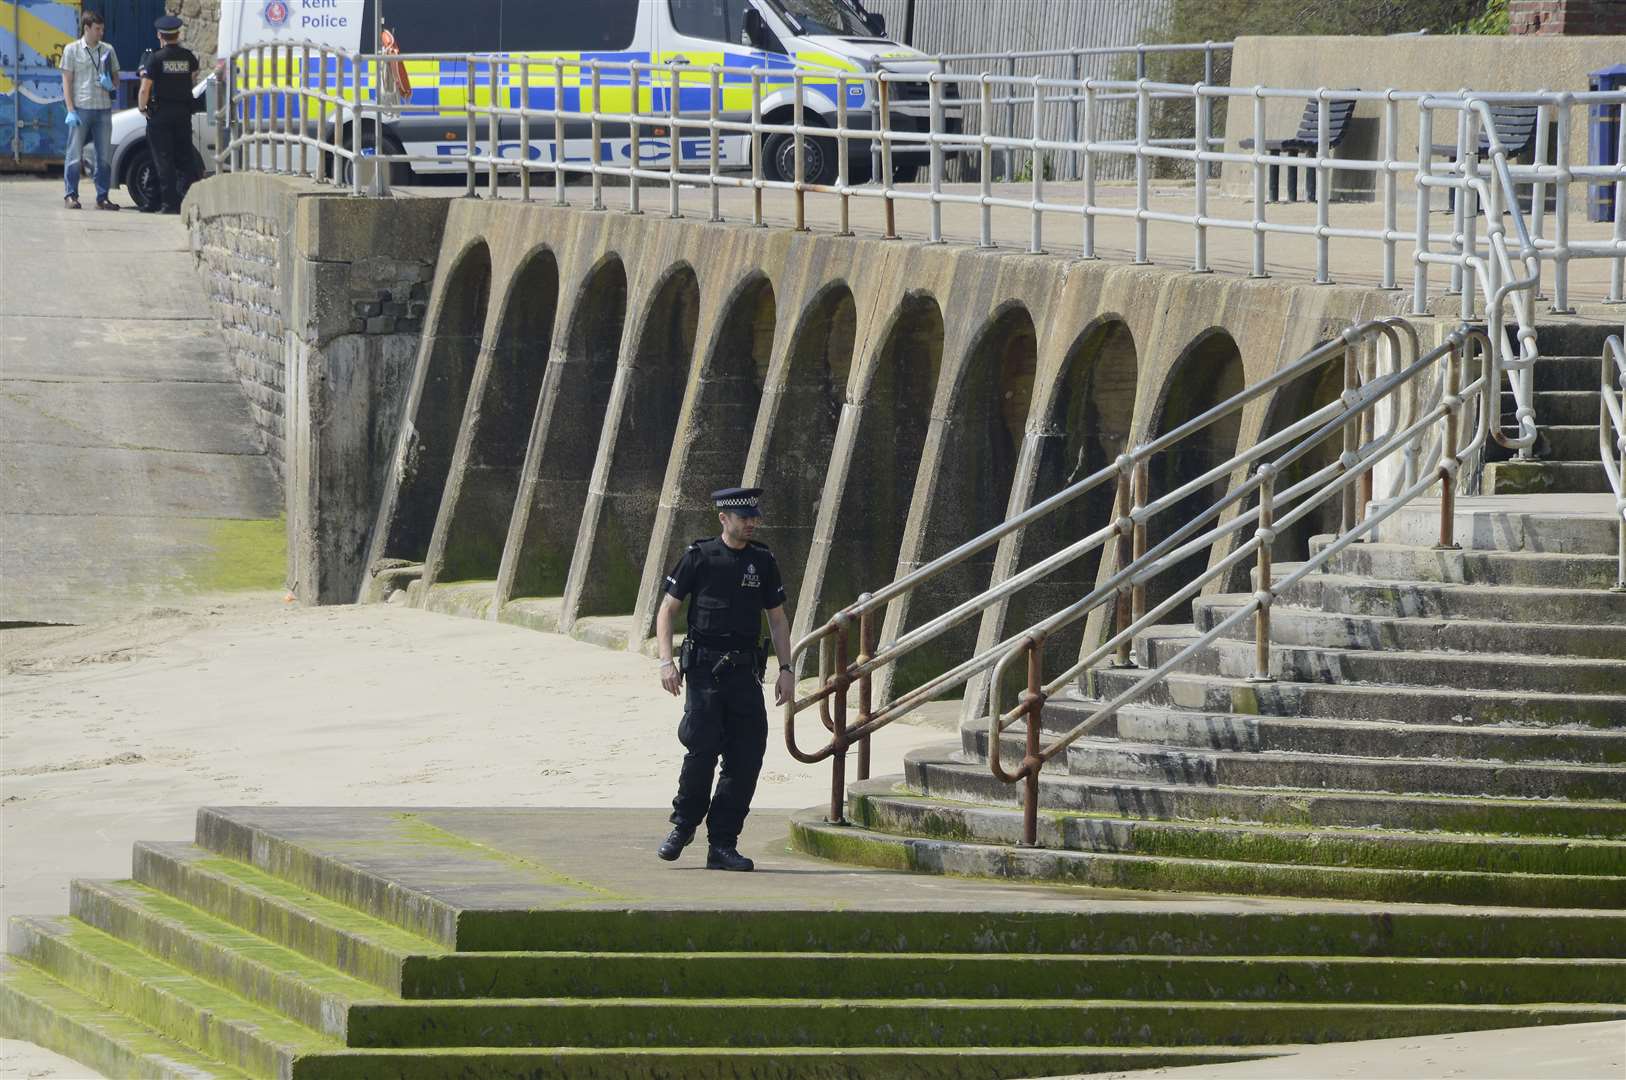 Police officers conducted their inquiries before the tide came in